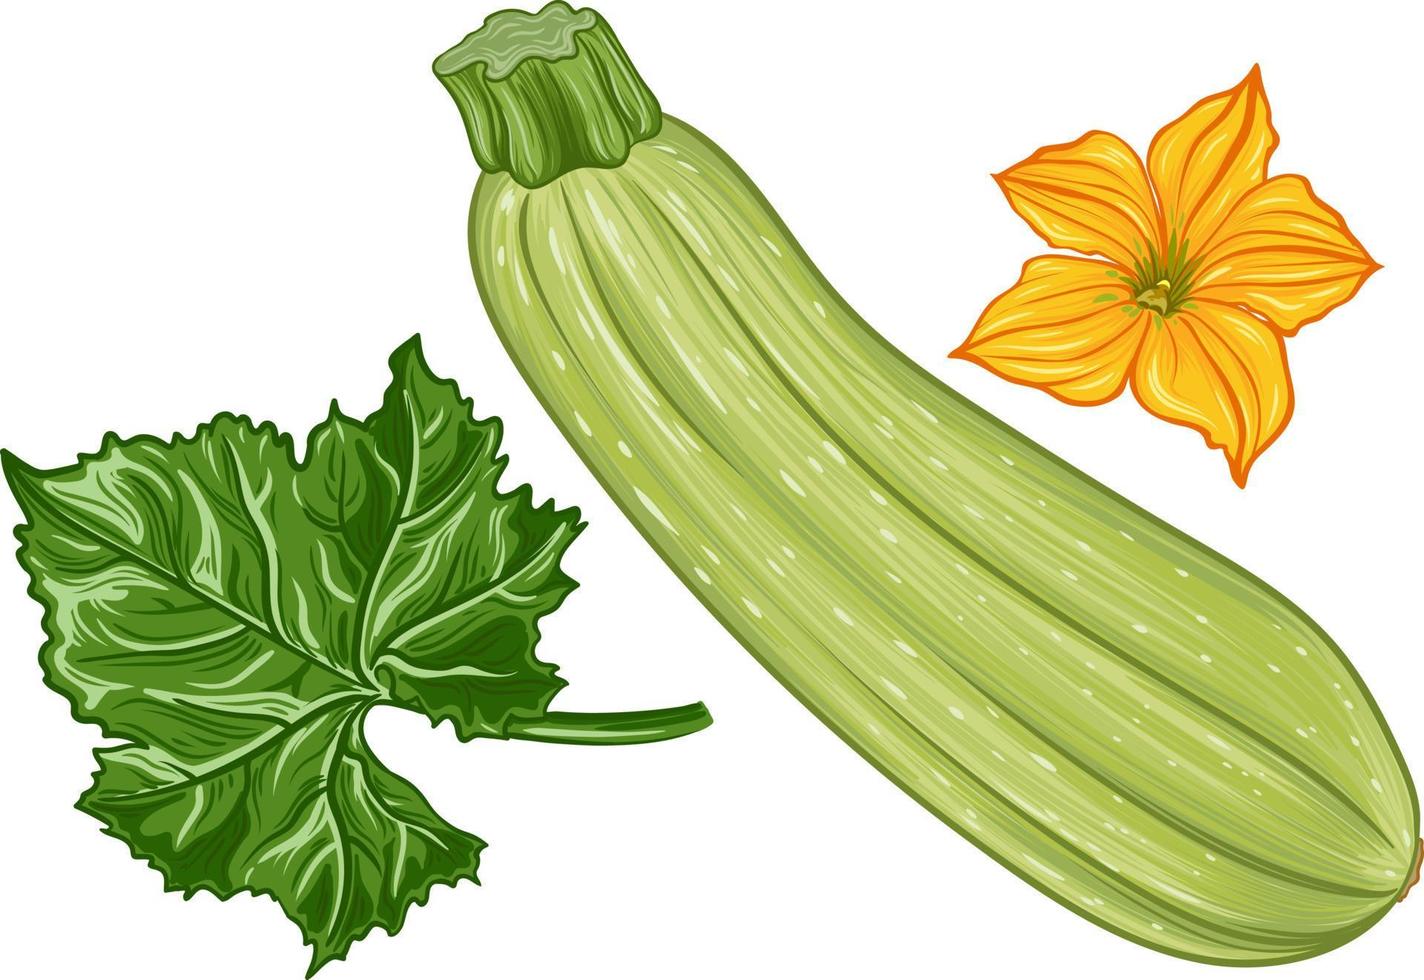 fresh green zucchini with leaves and a flower on a transparent background. botanical realistic squash fruit illustration vector